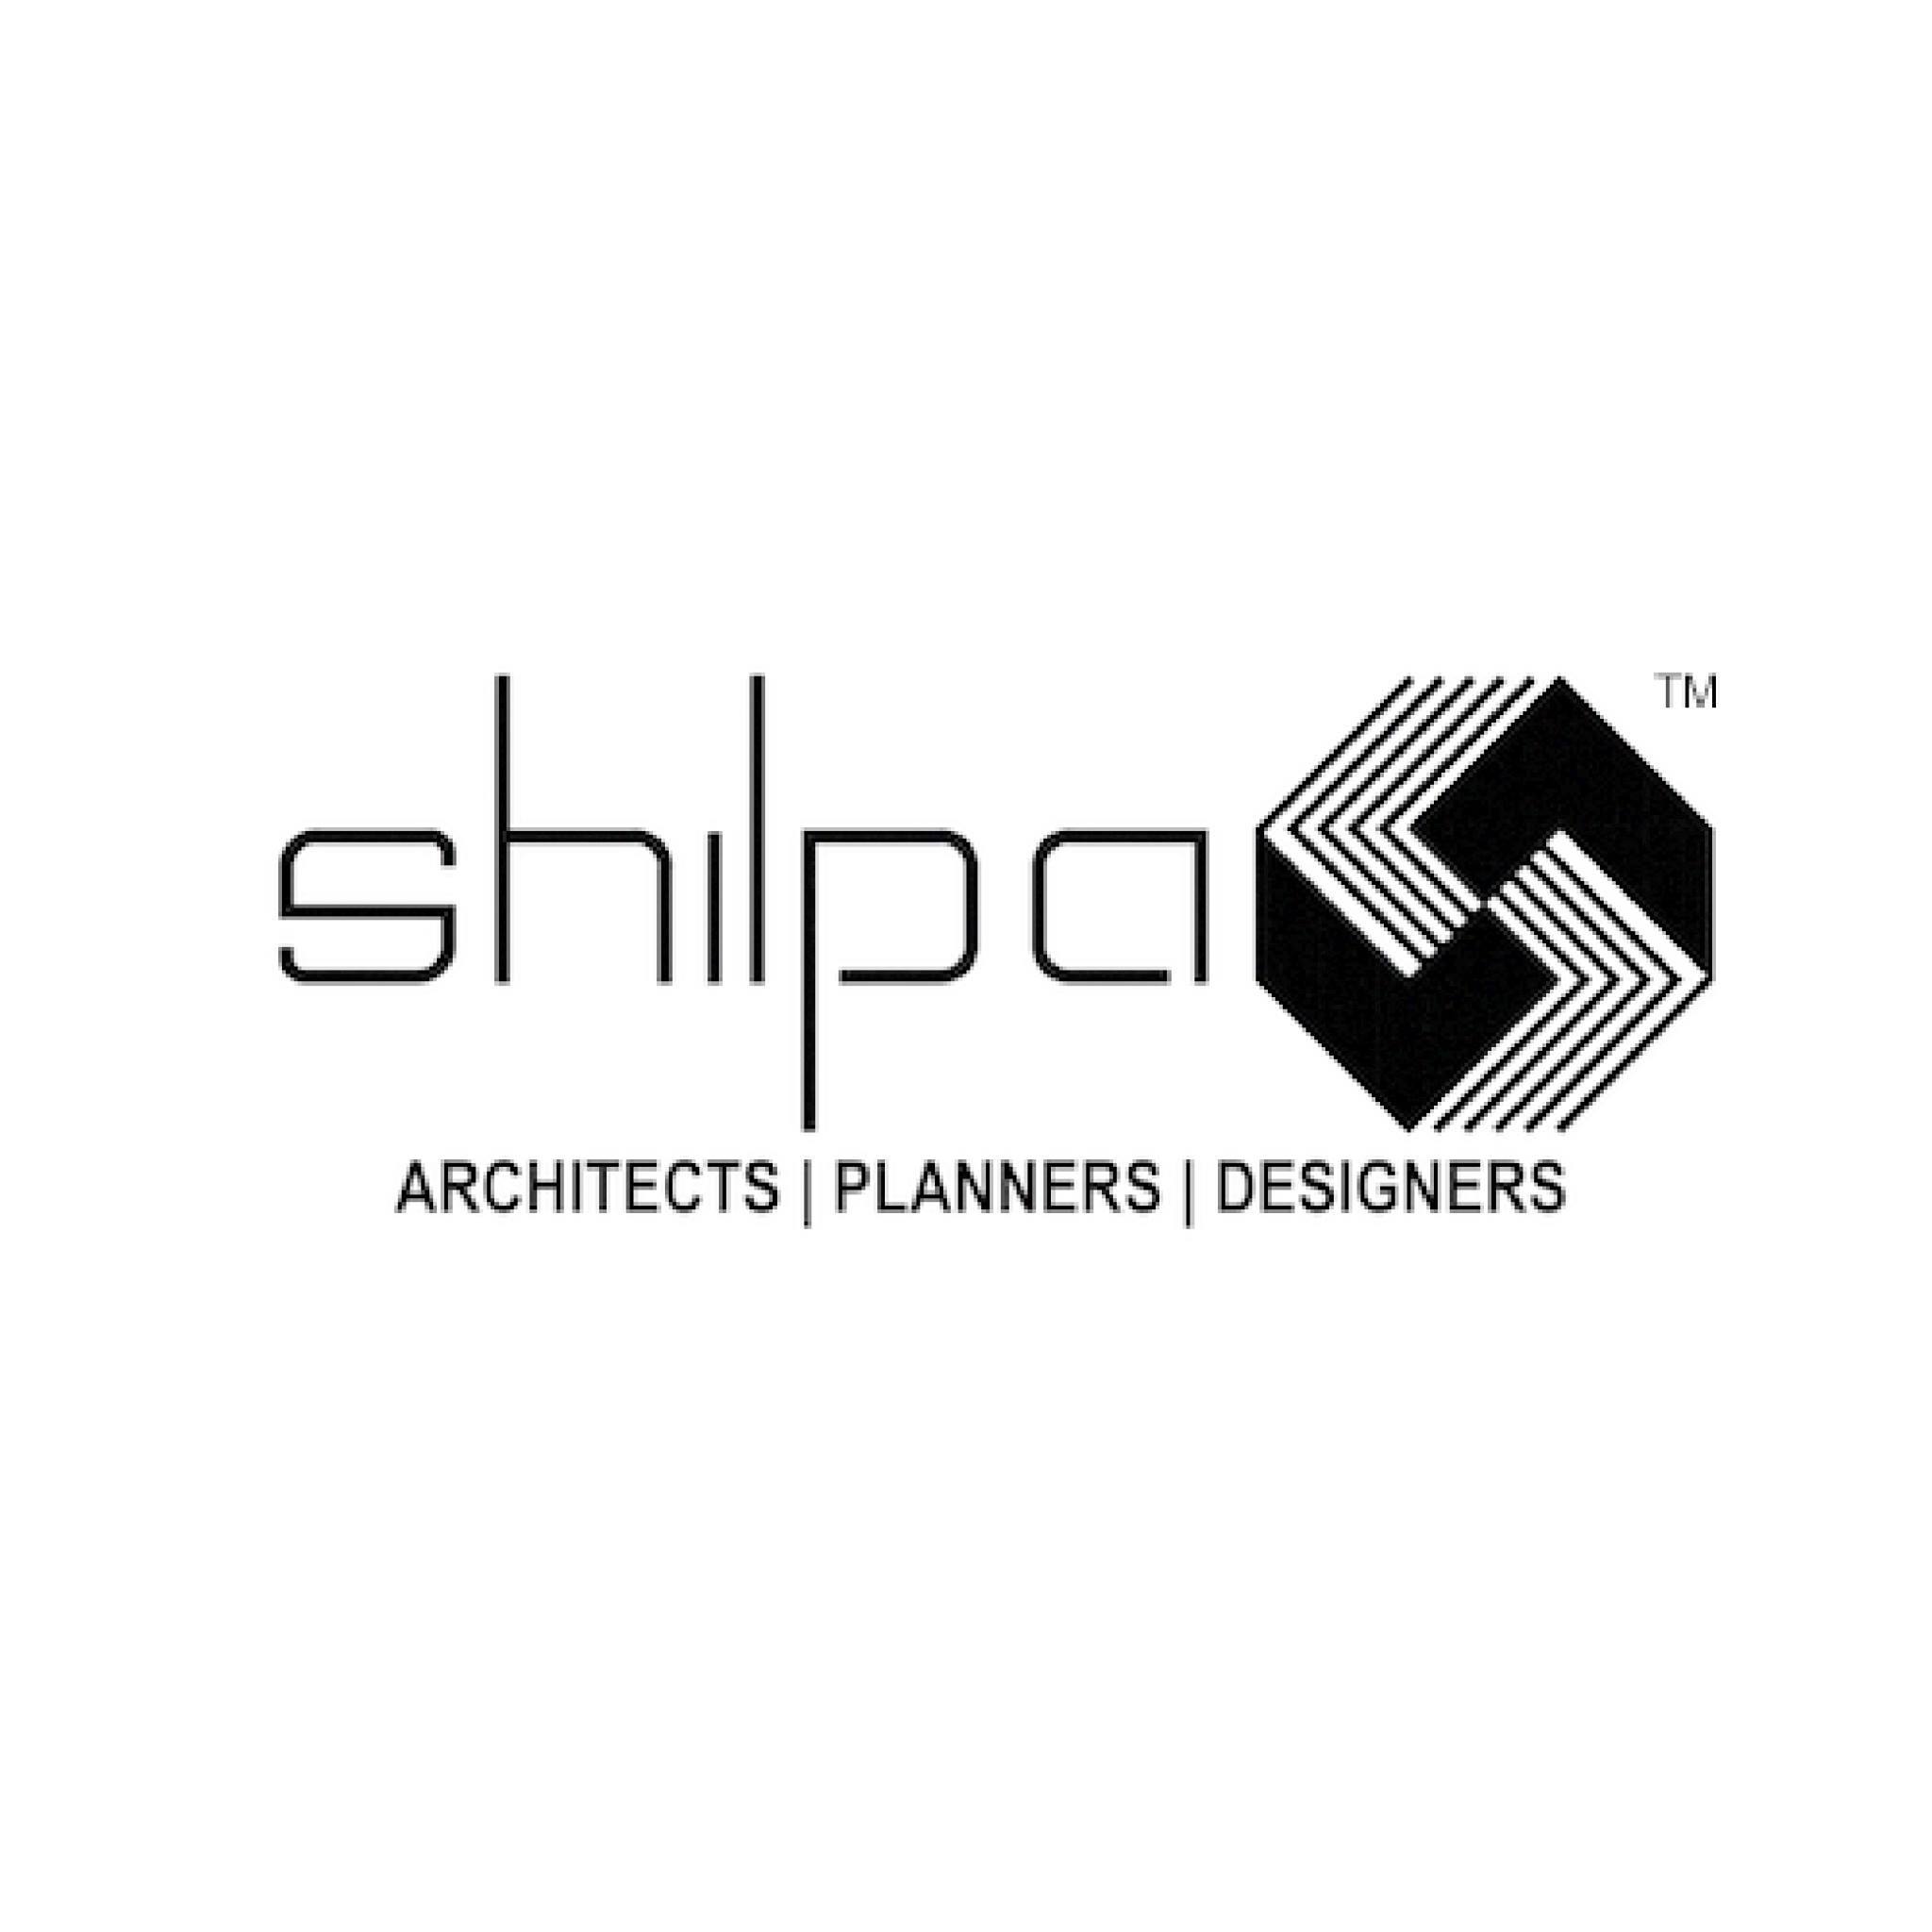 Shilpa Architects Planners Designers|Architect|Professional Services